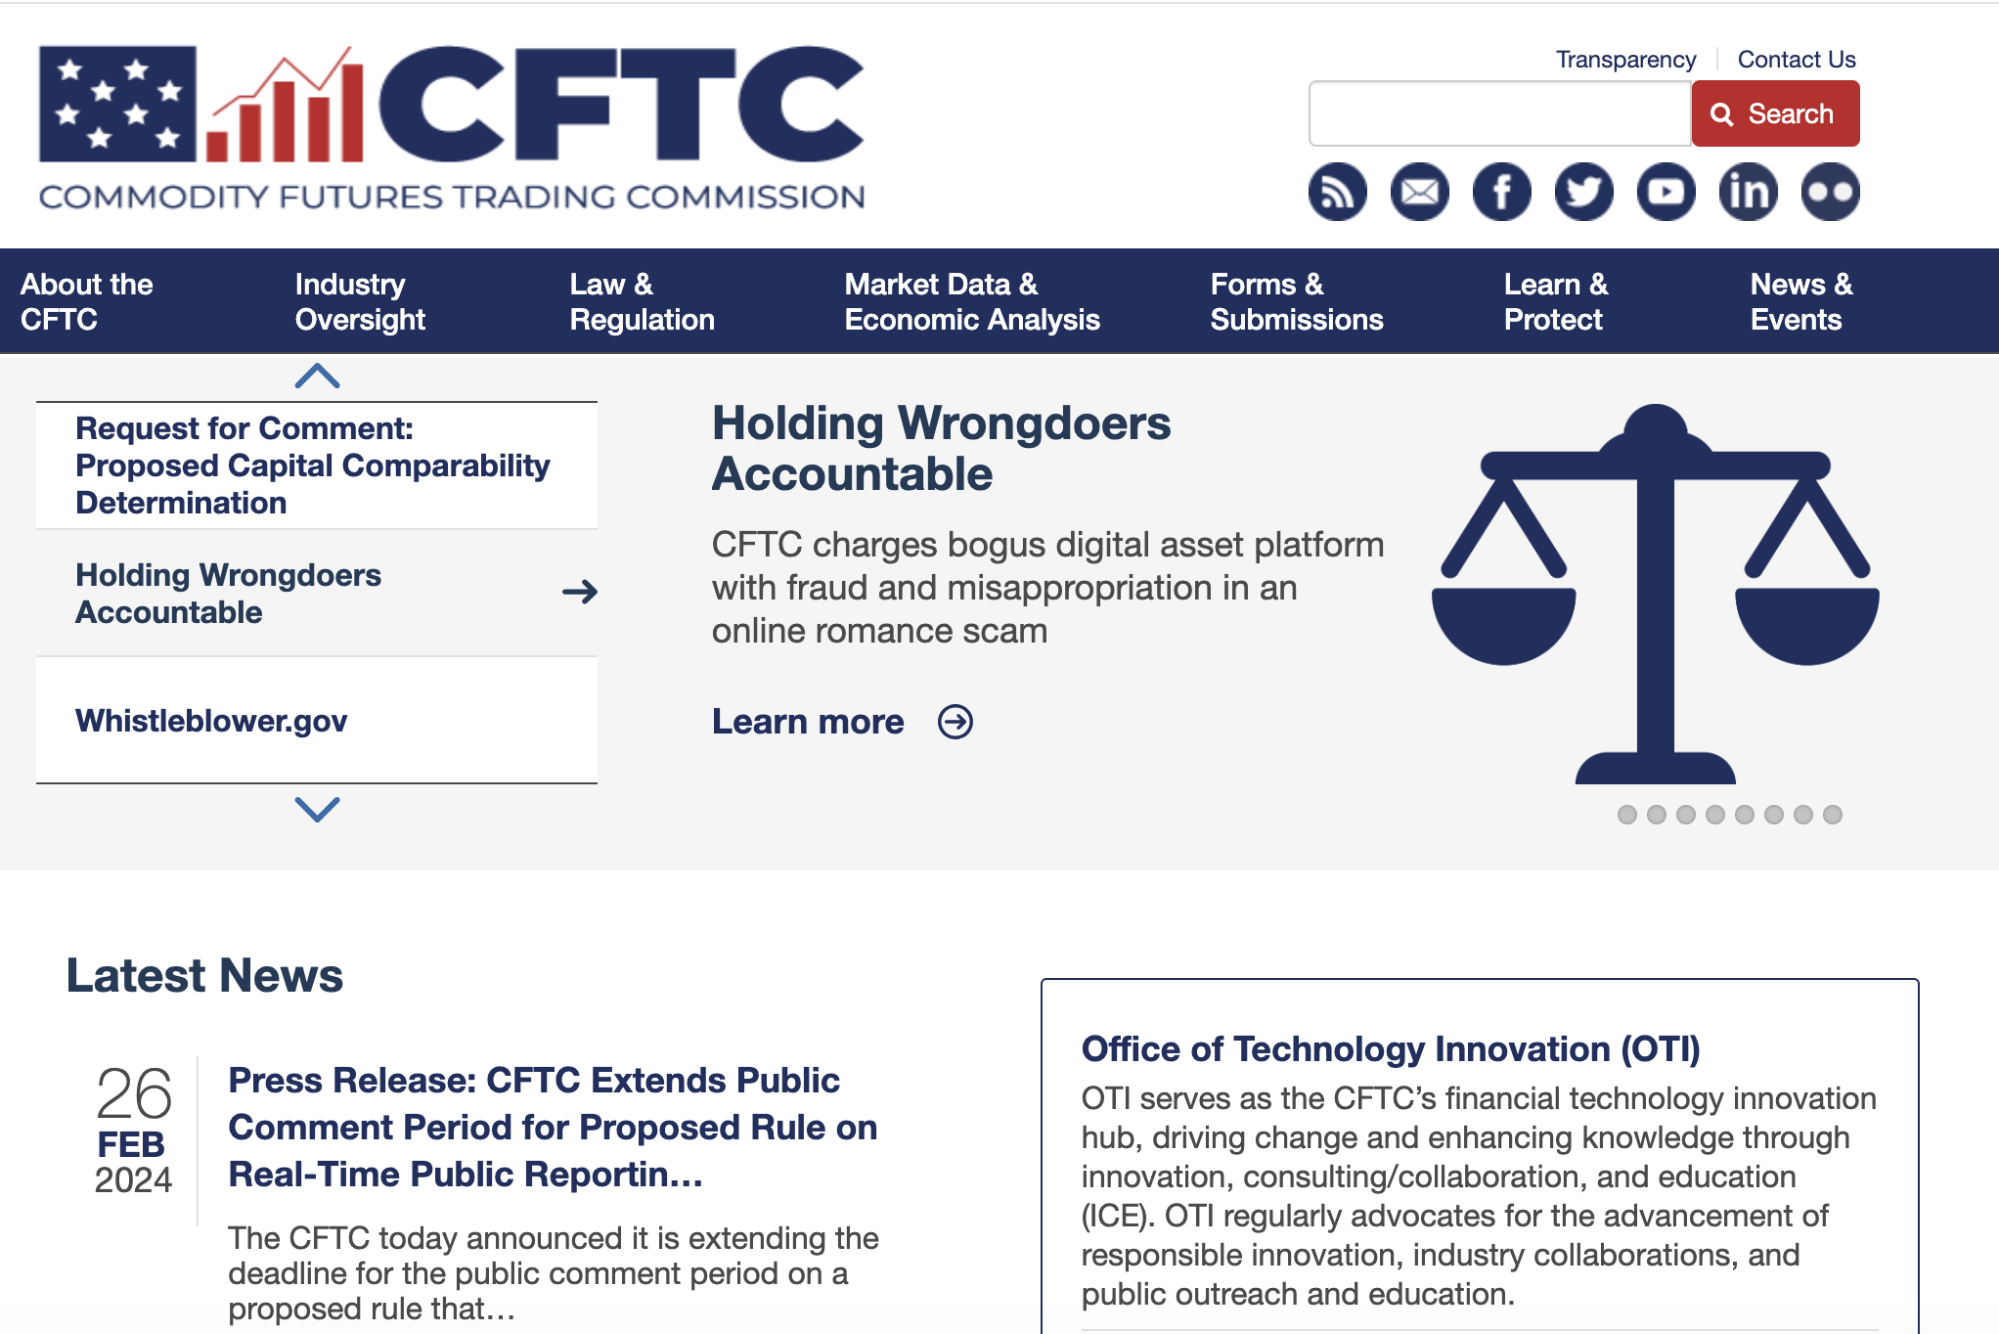 Commodity Futures Trading Commission's website